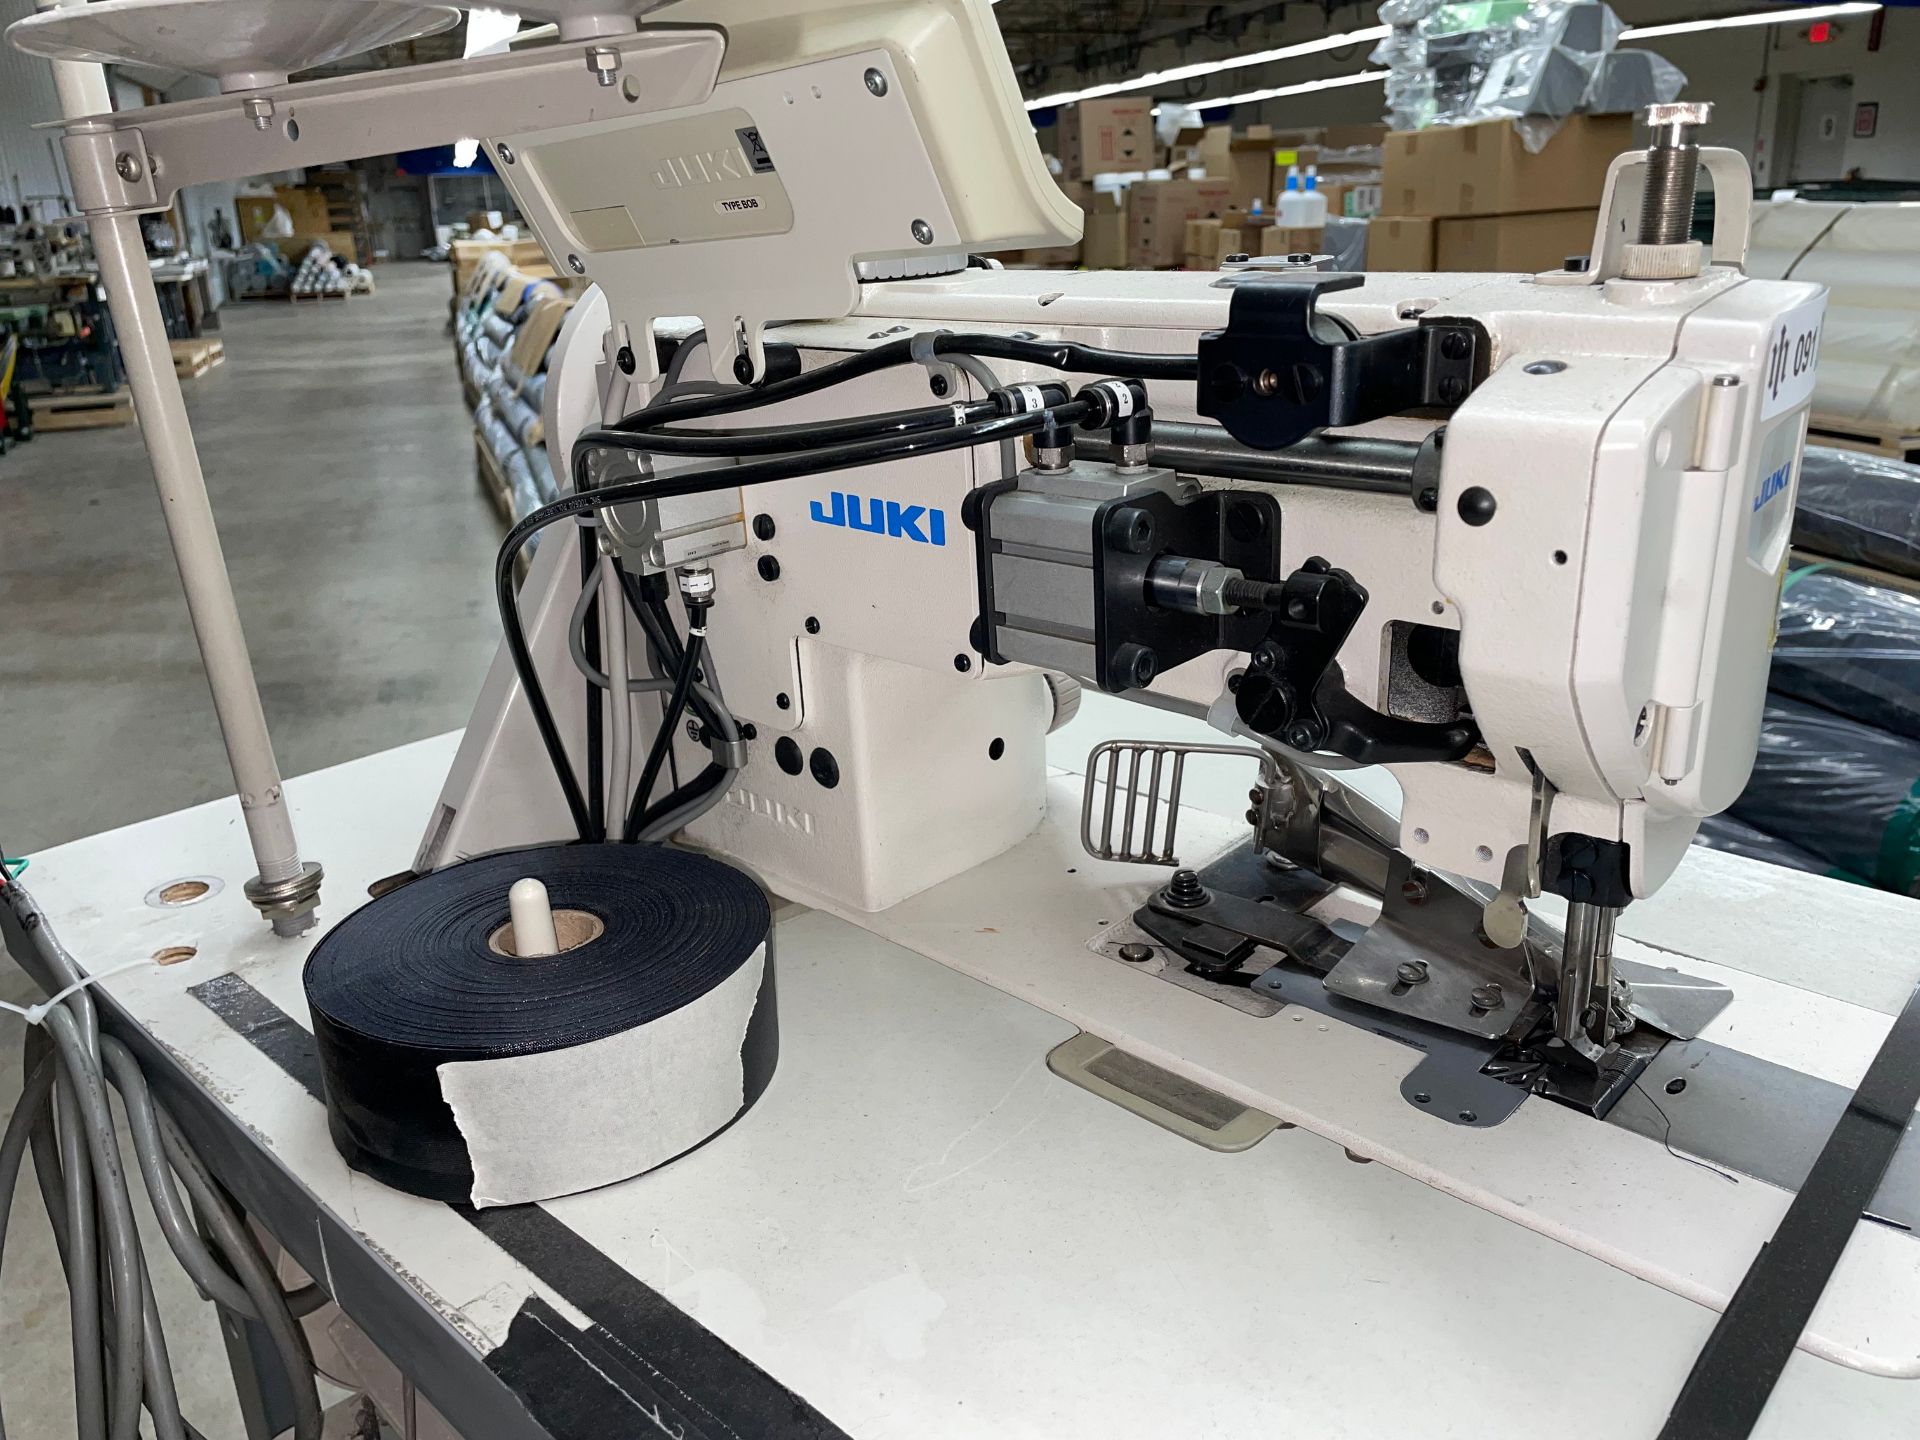 Juki Industrial Sewing Machine with Table - Image 3 of 10